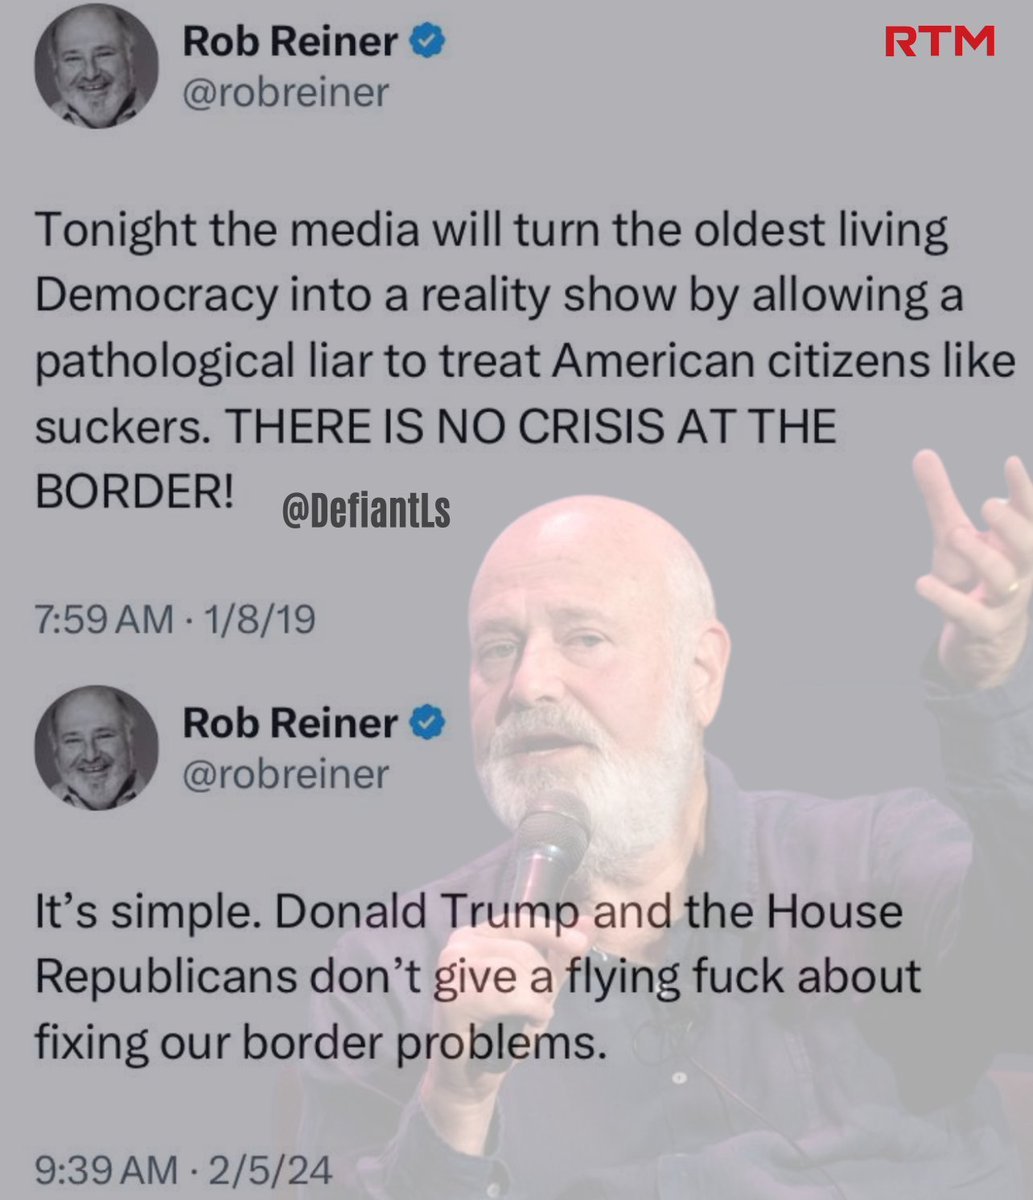 @robreiner Can you describe Rob Reiner using 1 word?